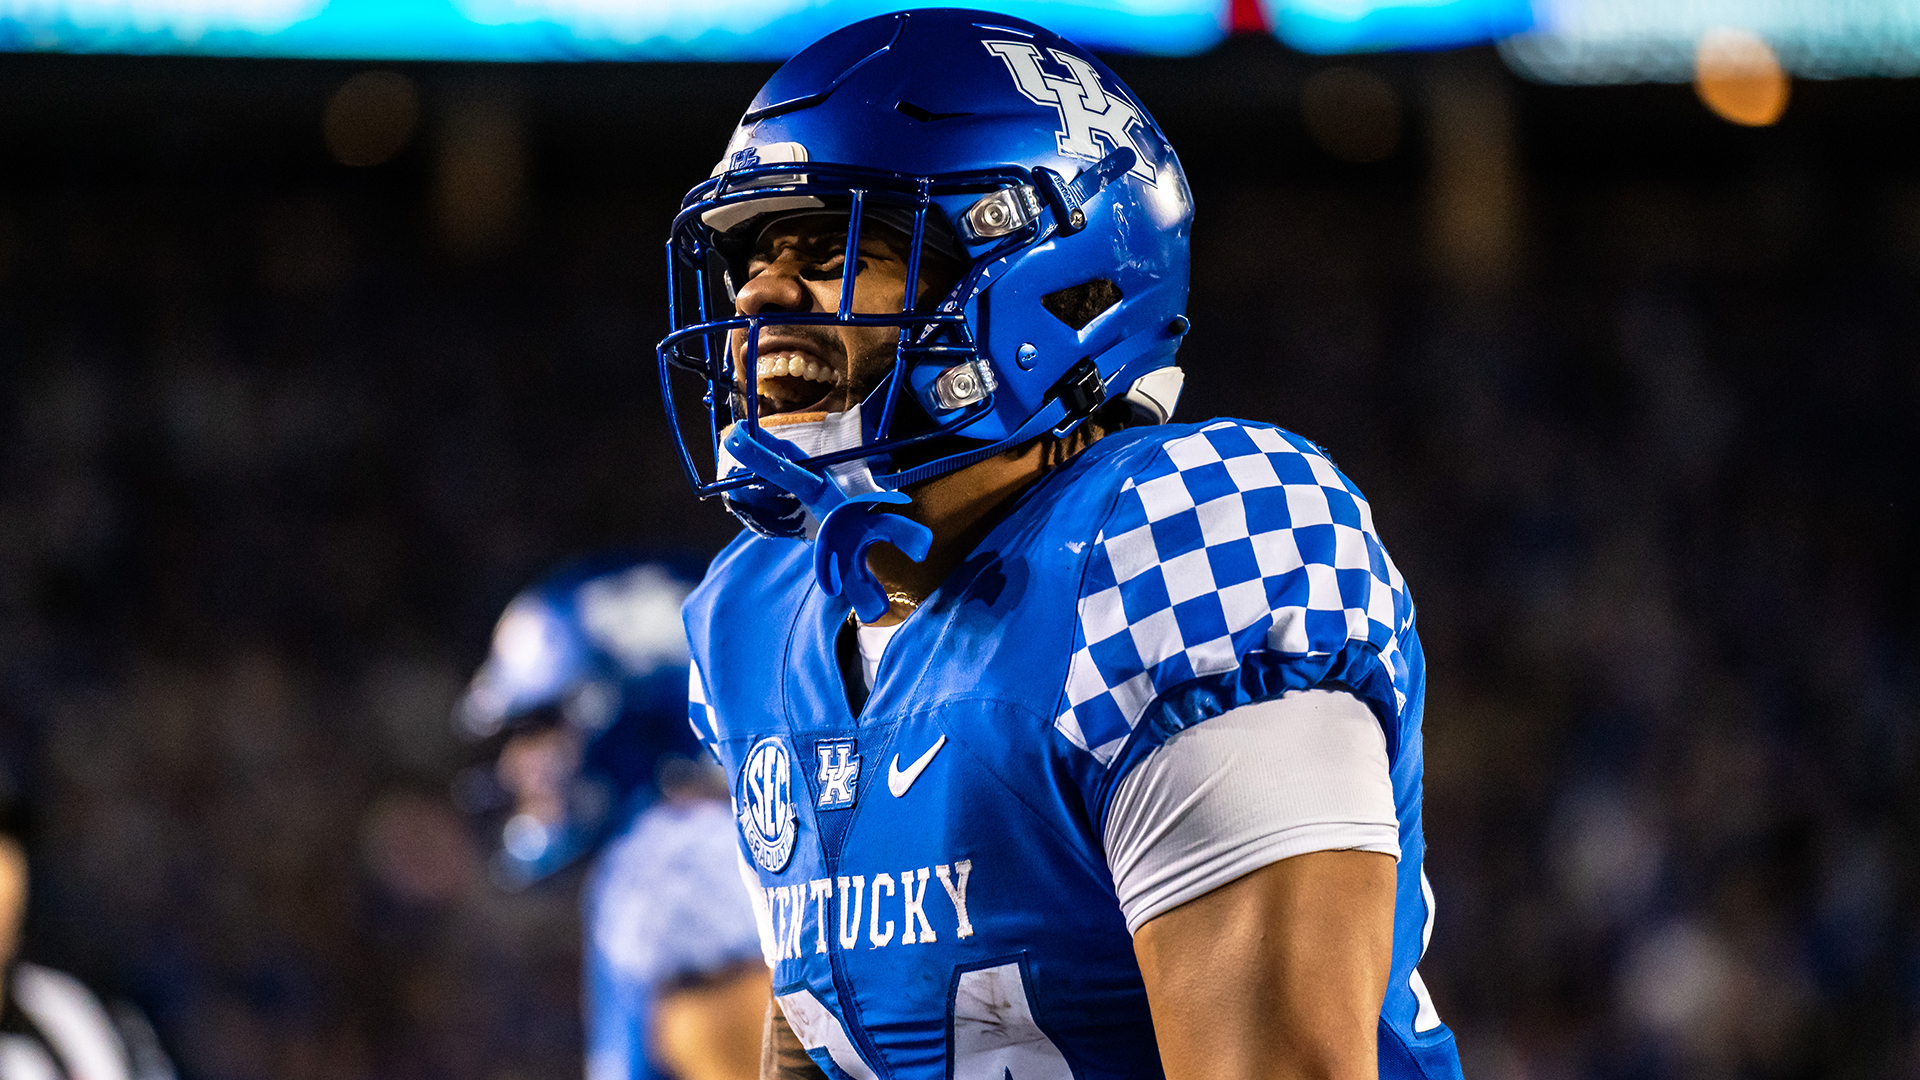 Cats Turn to Familiar Formula in Win Over Mississippi State